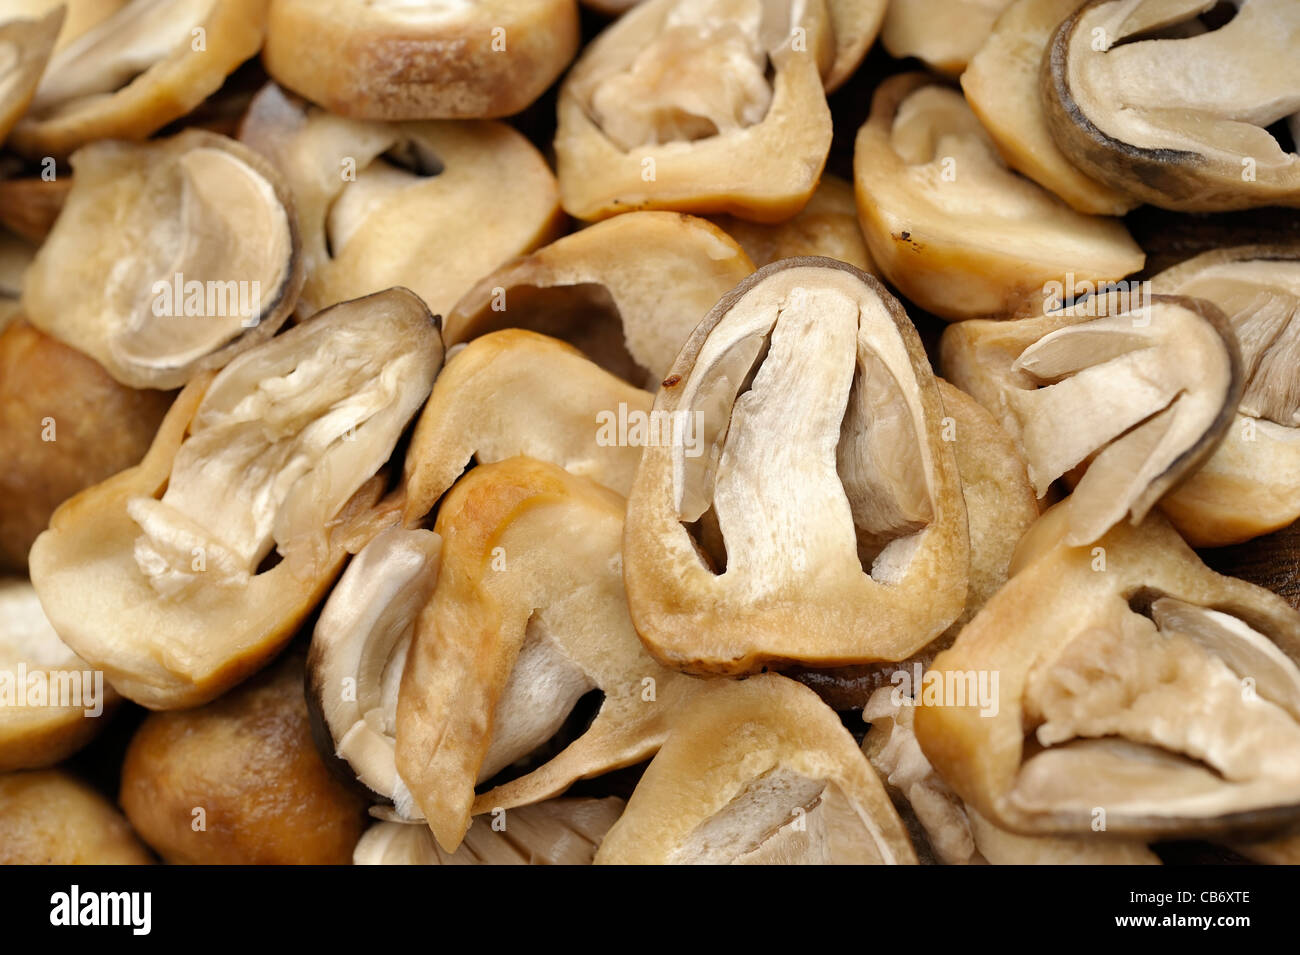 Macro shot of straw mushrooms washed and cut, prepared as cooking ingredients. Stock Photo